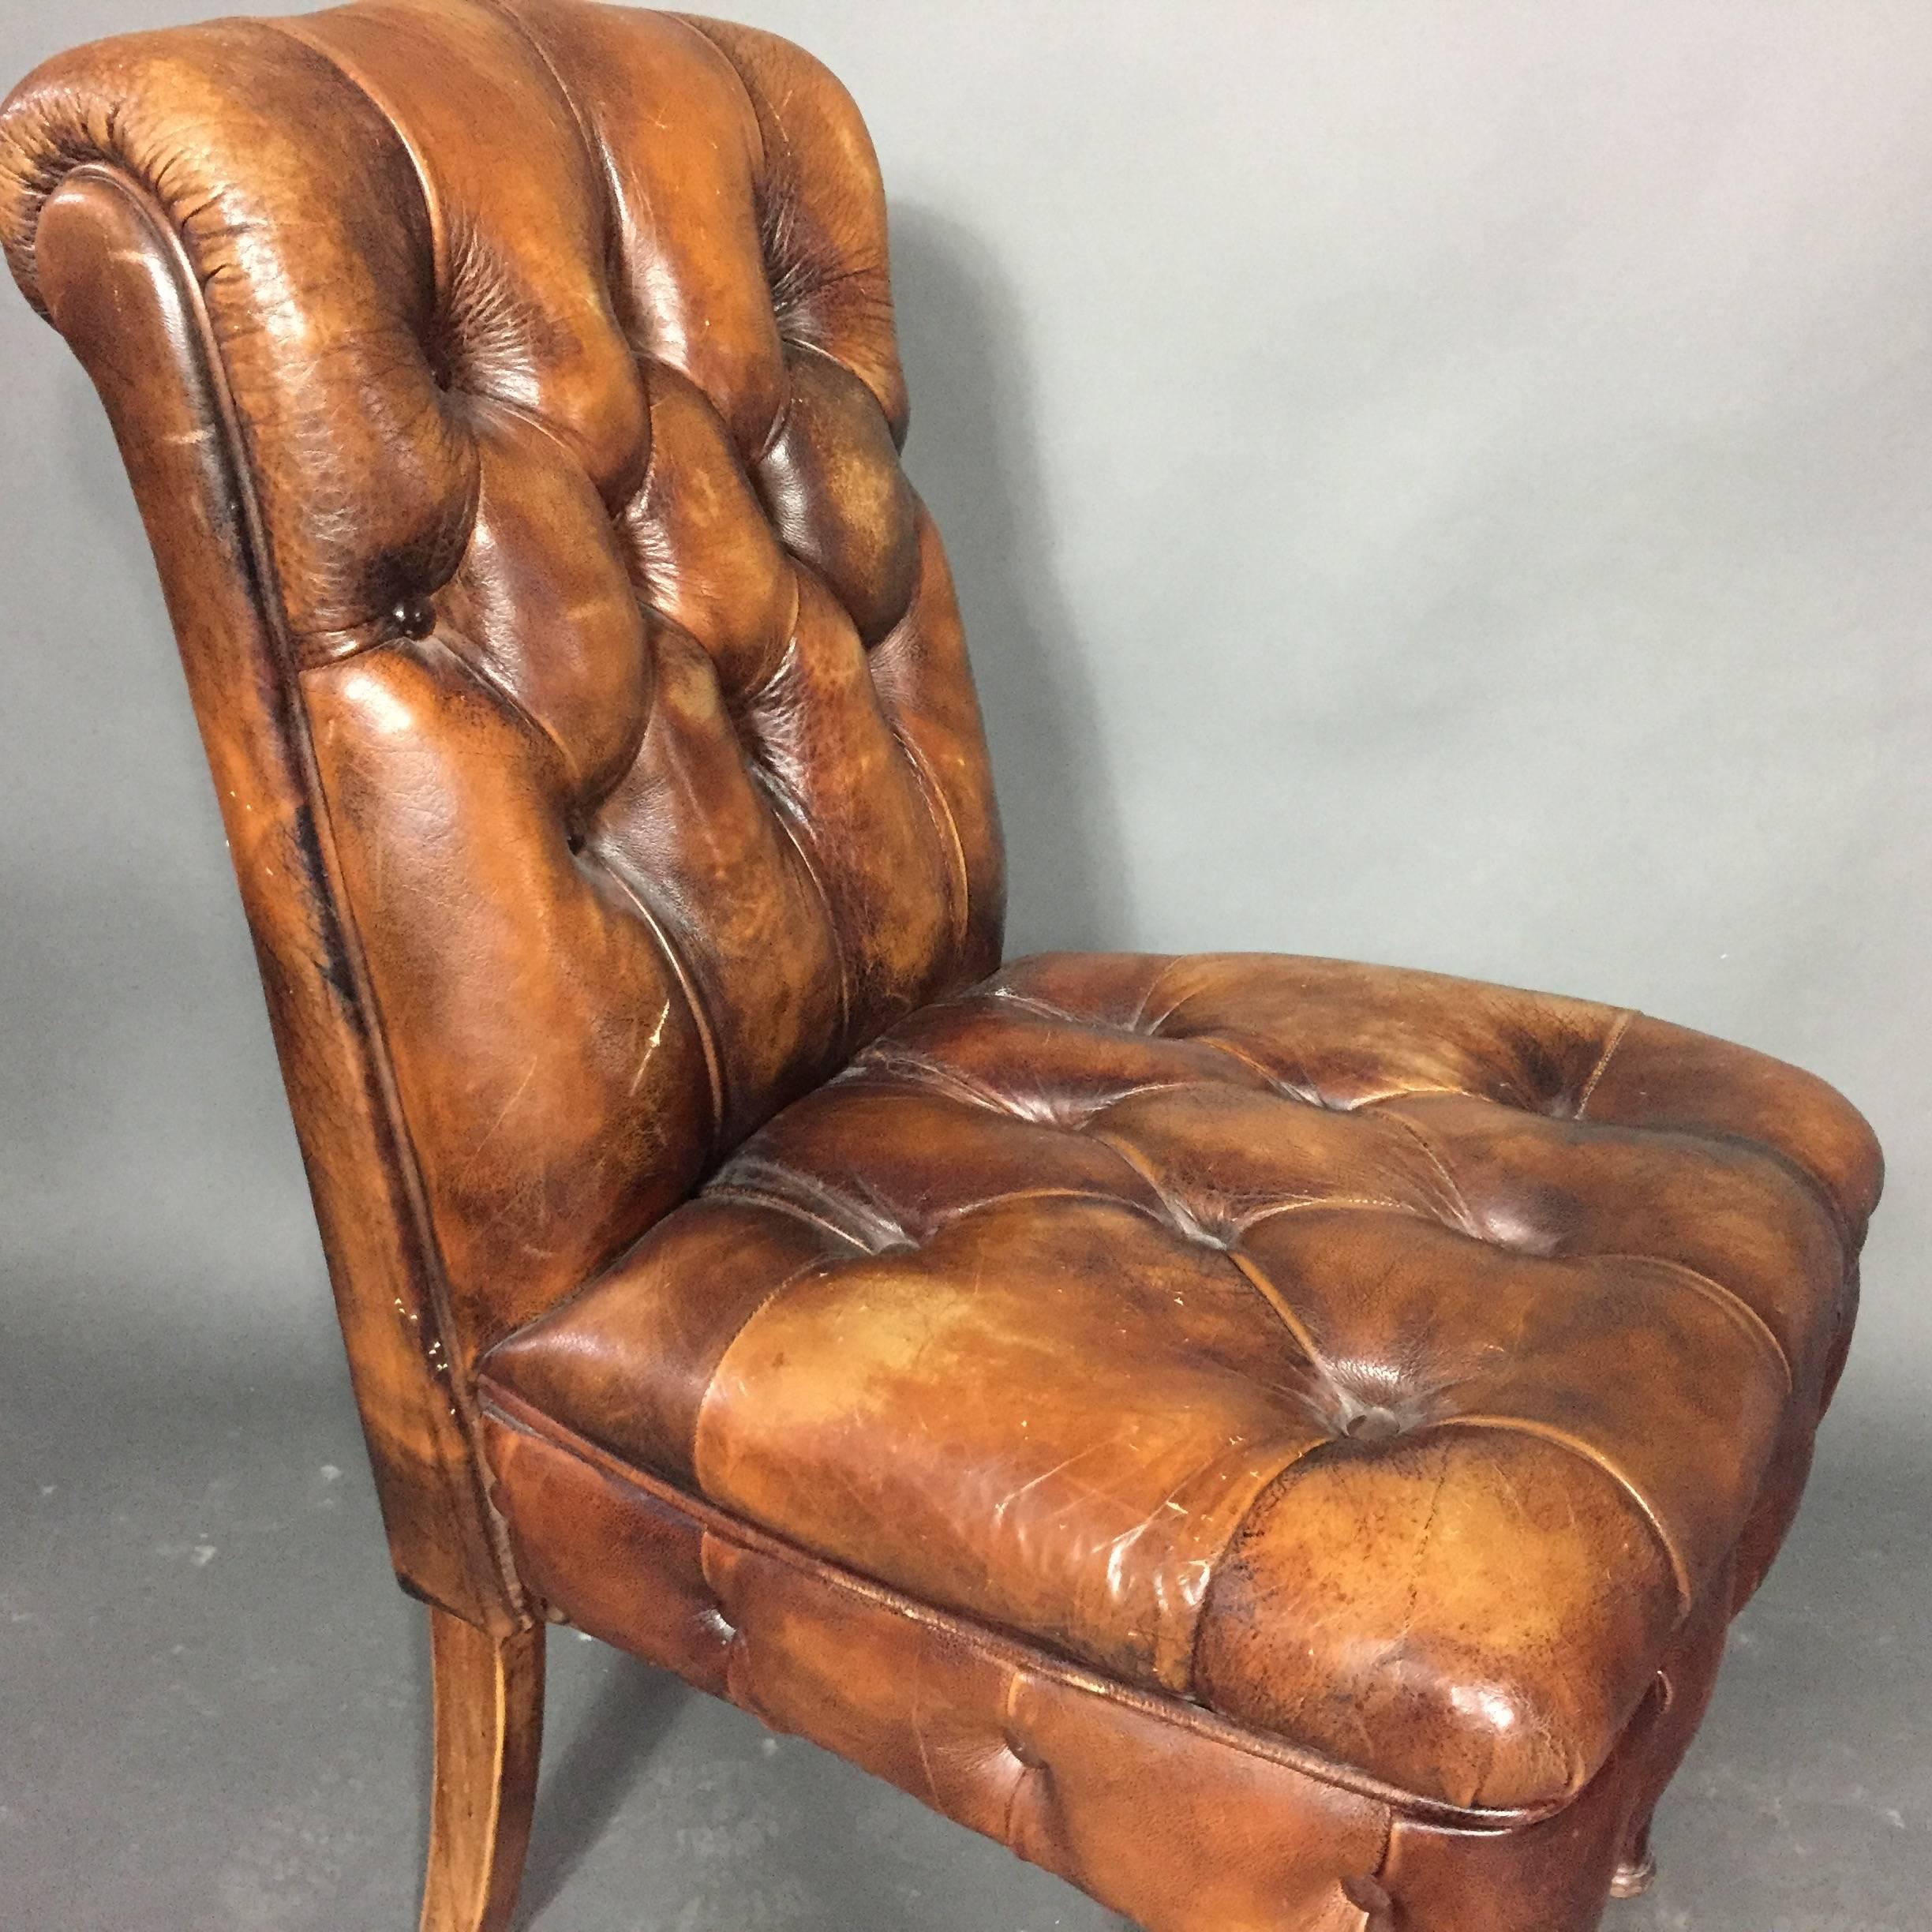 A rather sweet English slipper chair in the Chesterfield style from the 1920s professionally later re-leathered. Wonderful patina. Newer front legs.